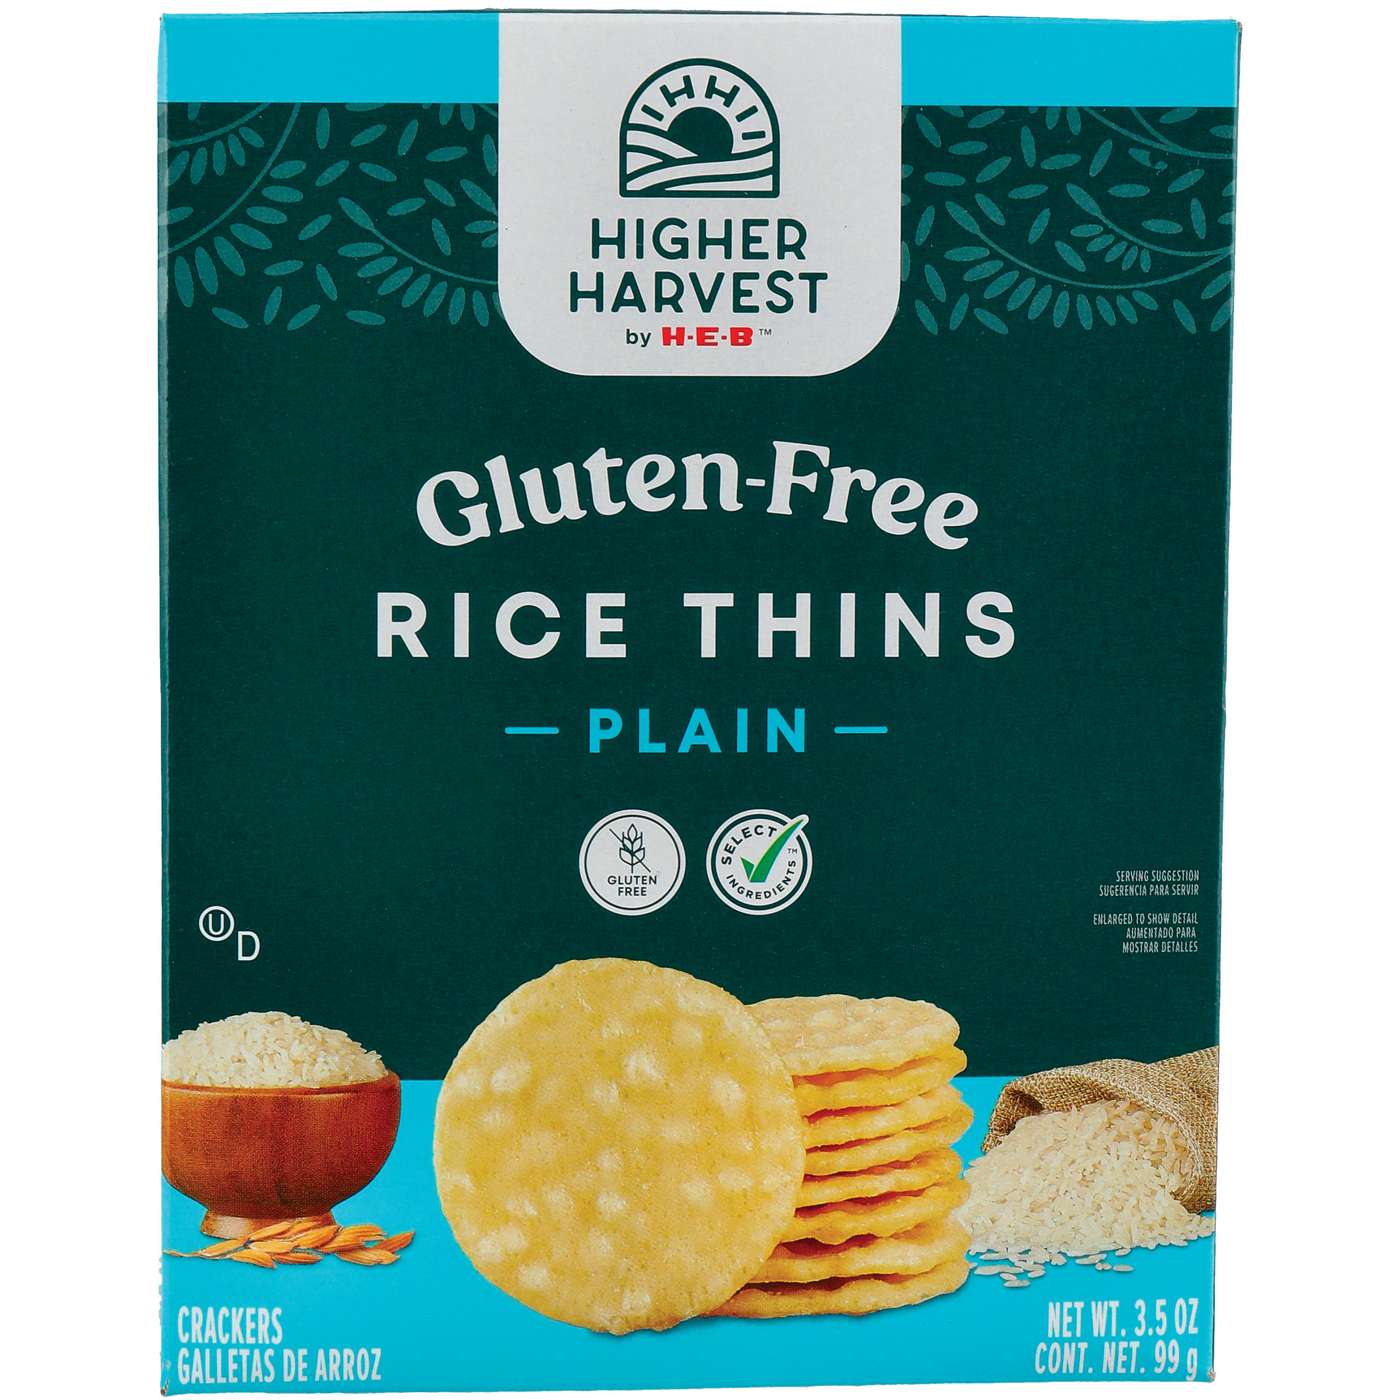 Higher Harvest by H-E-B Gluten-Free Rice Thins - Plain; image 1 of 3